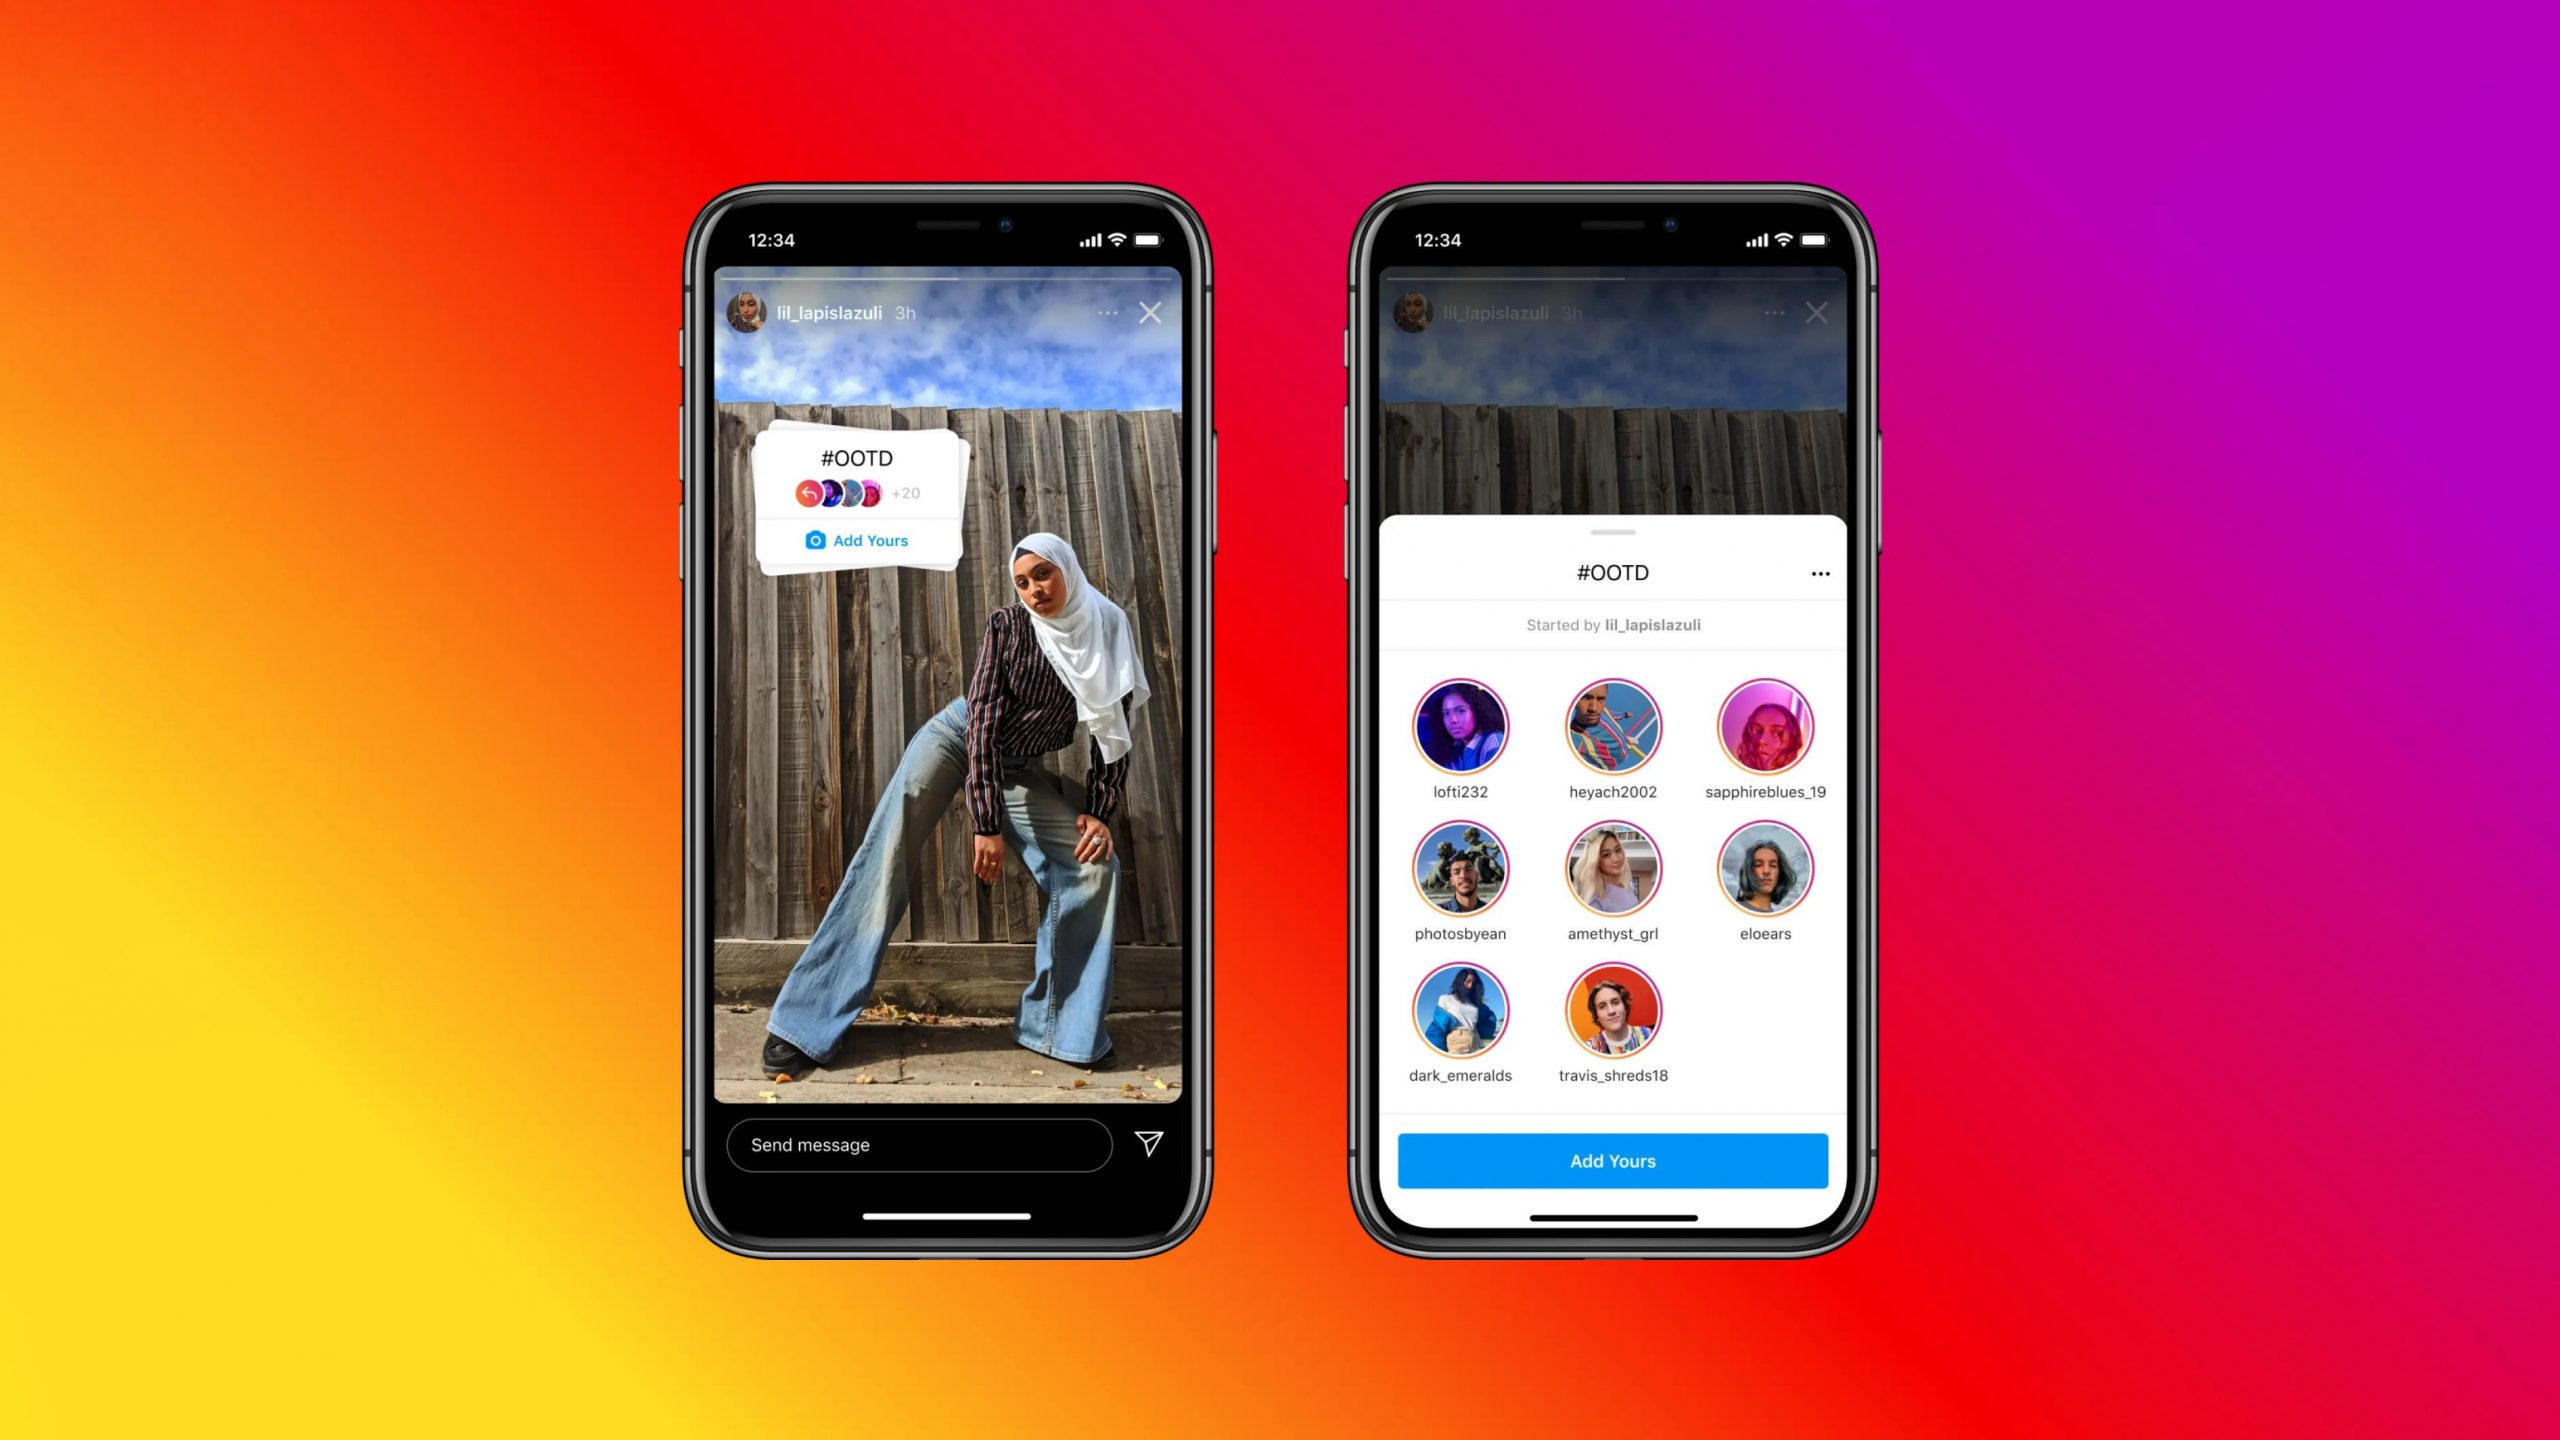 Instagram rolls out an ‘Add Yours’ sticker in Stories